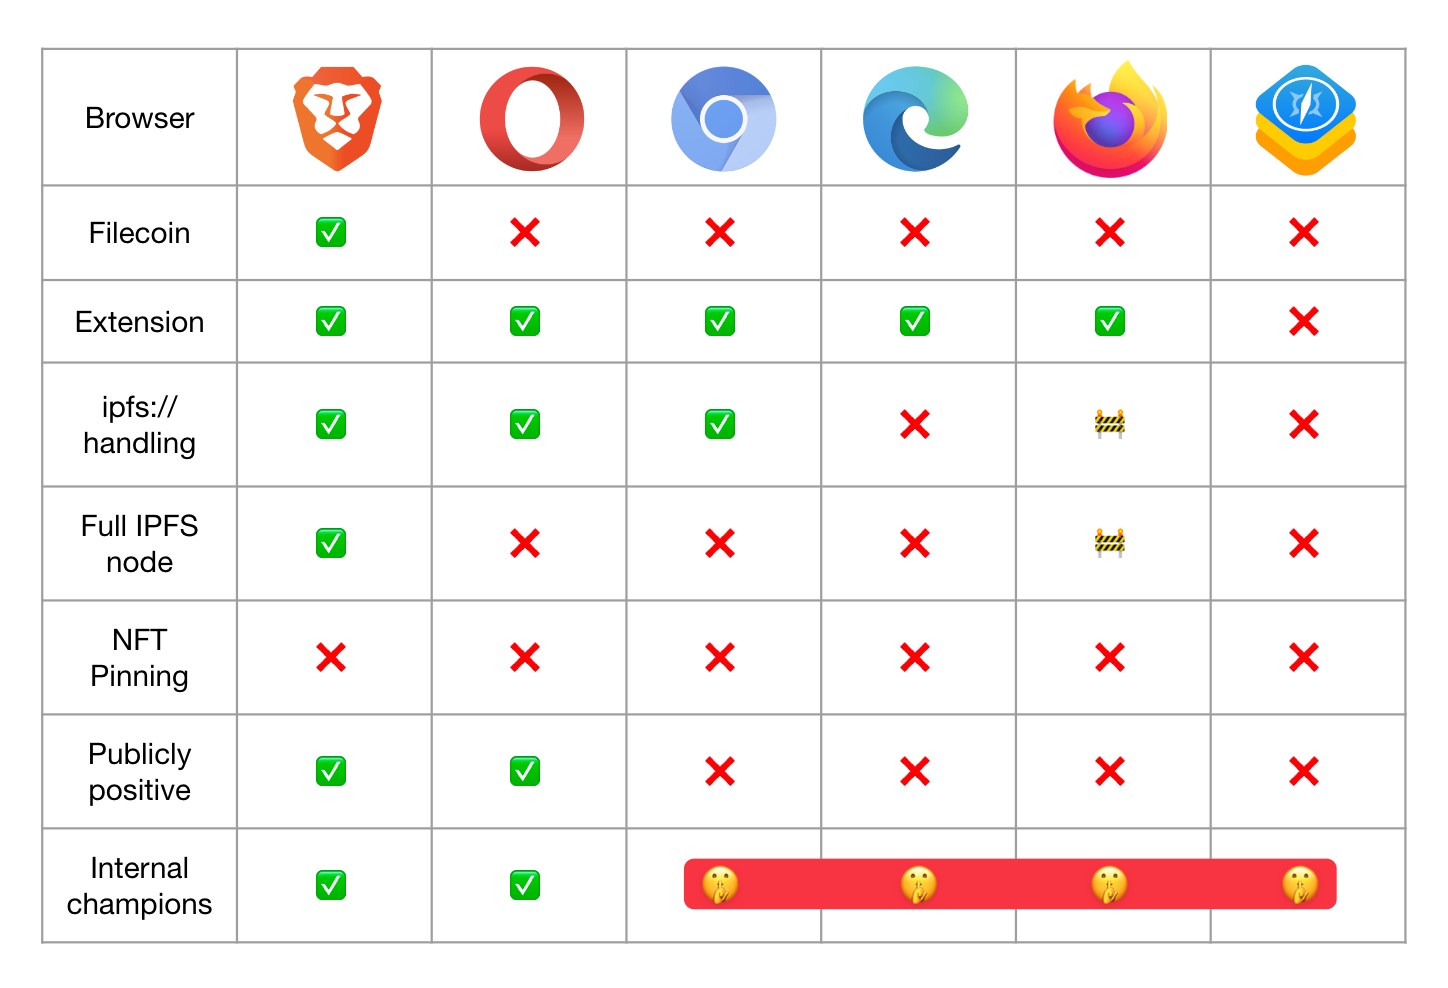 Table of browsers and levels of IPFS support